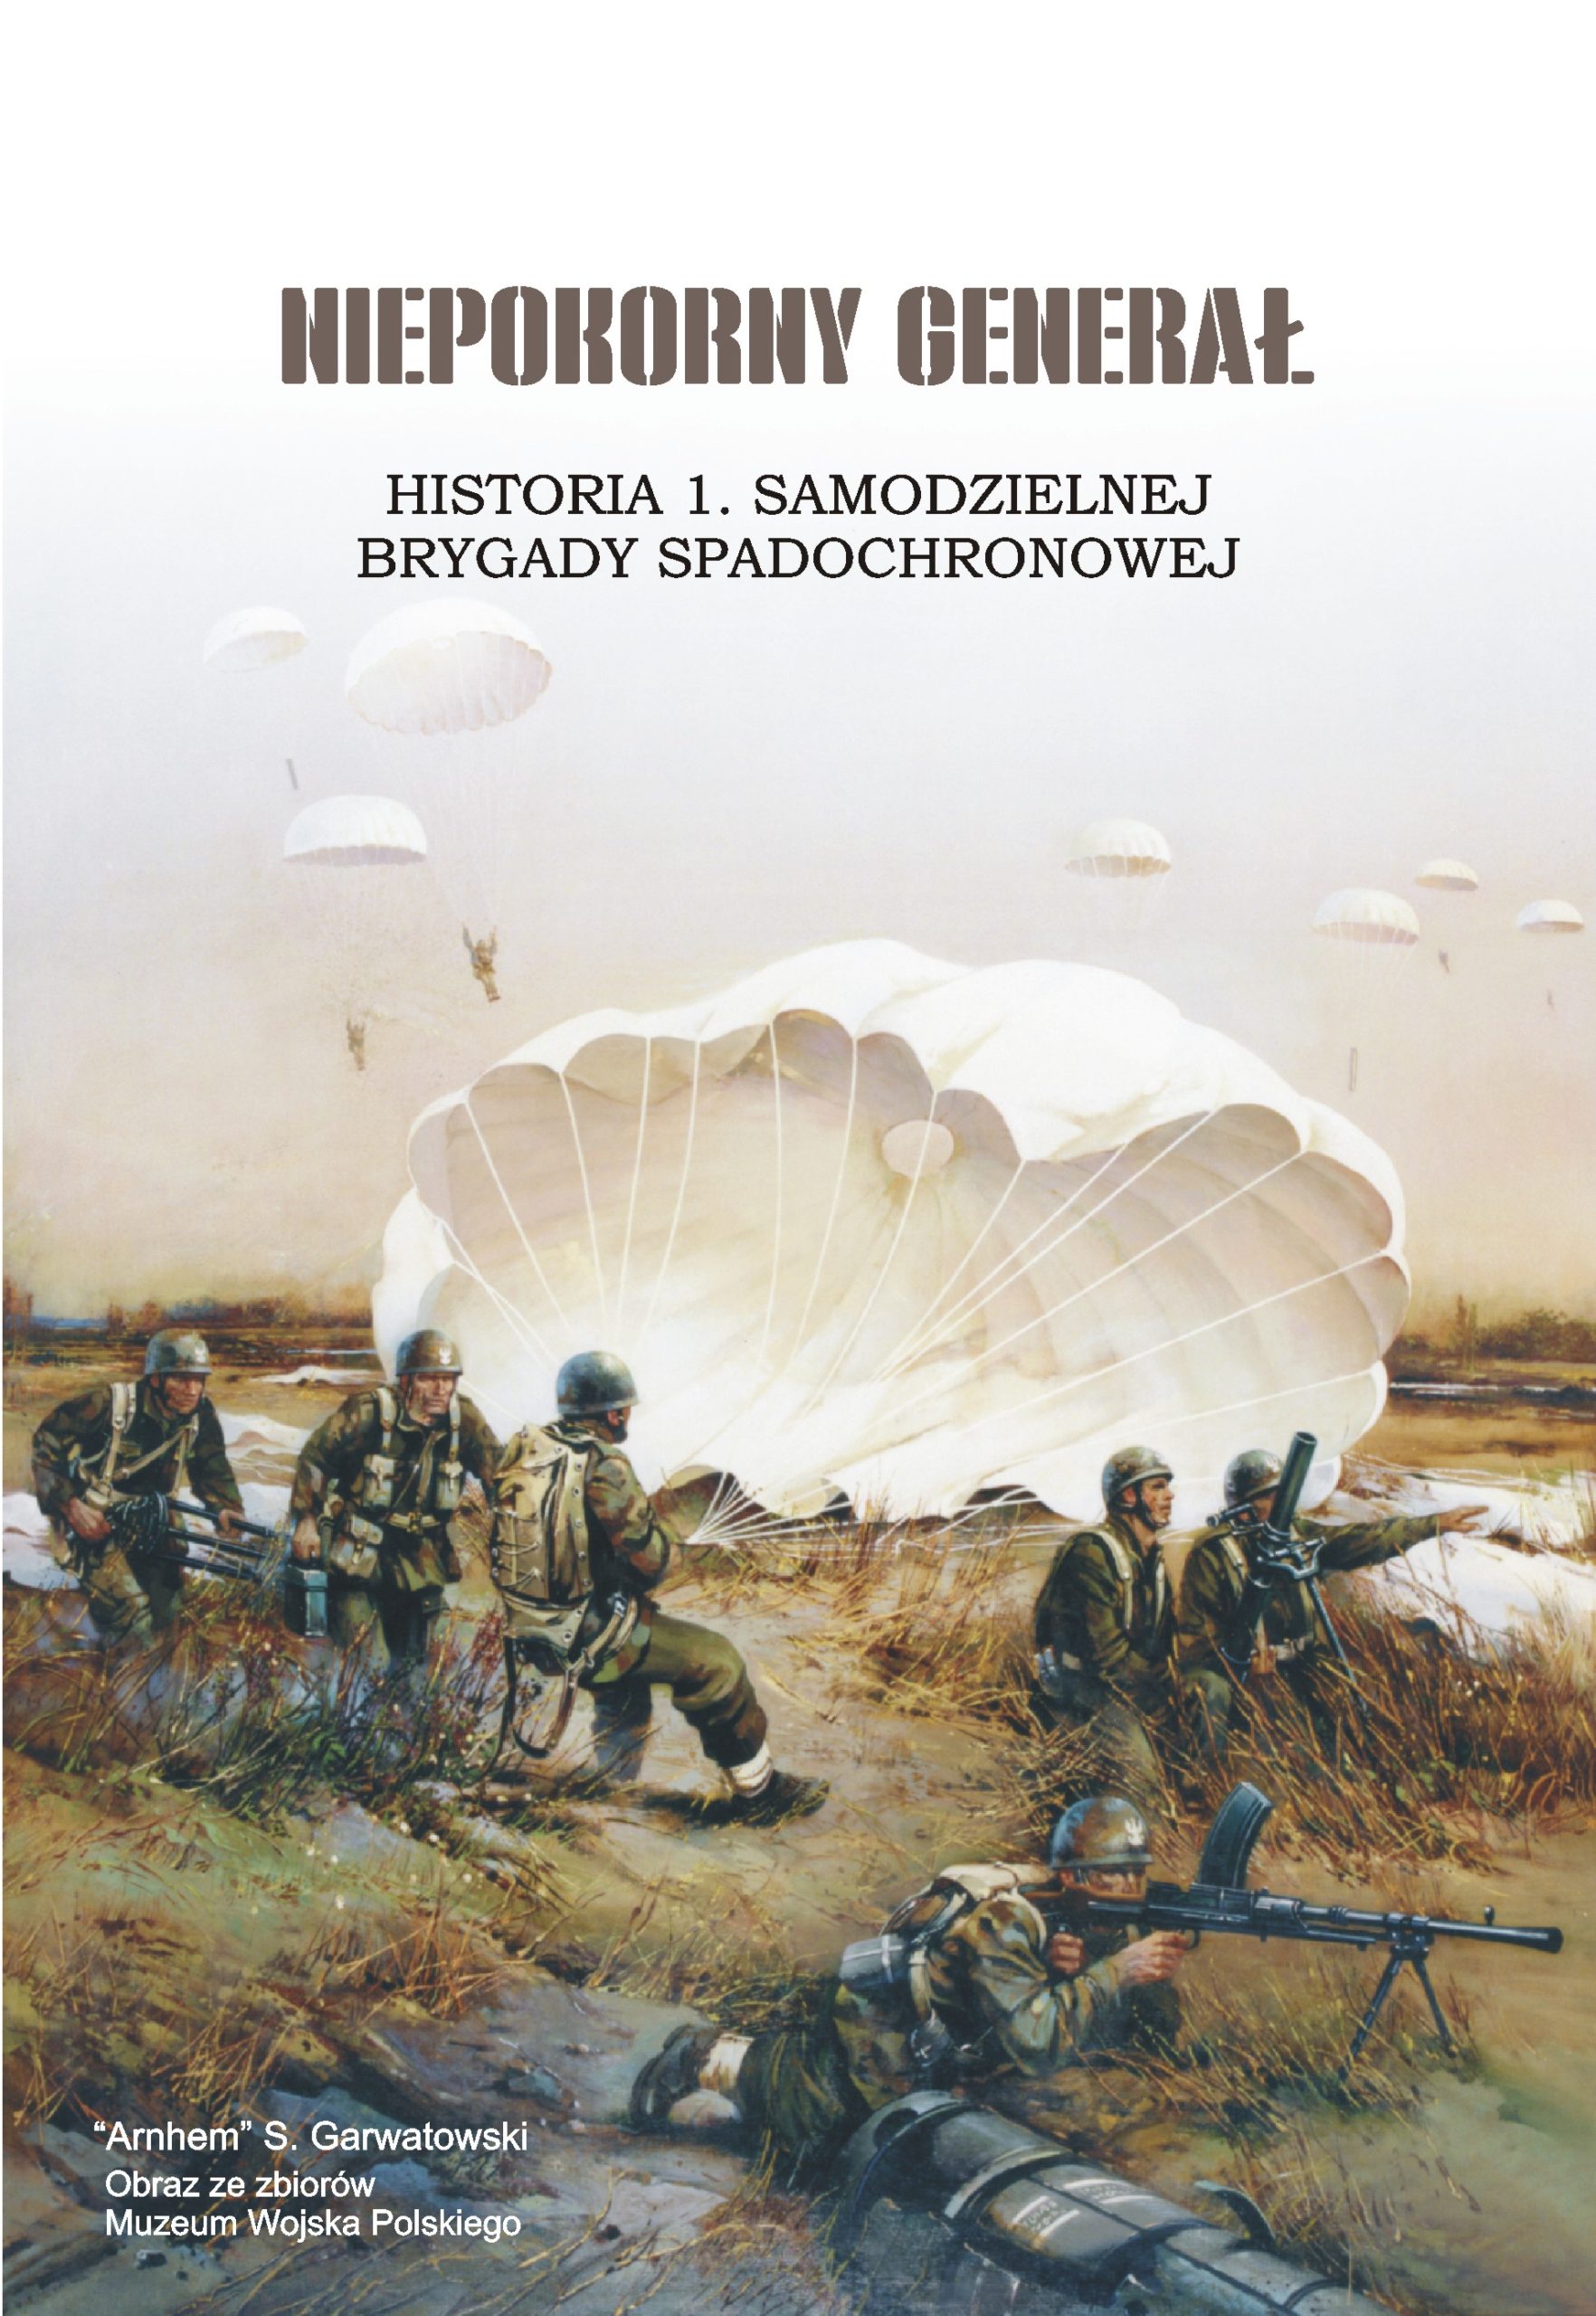 The Unbowed General. History of Brigadier General Stanisław Sosabowski’s 1st Independent Parachute Brigade commemorating the 54th anniversary of his death: download